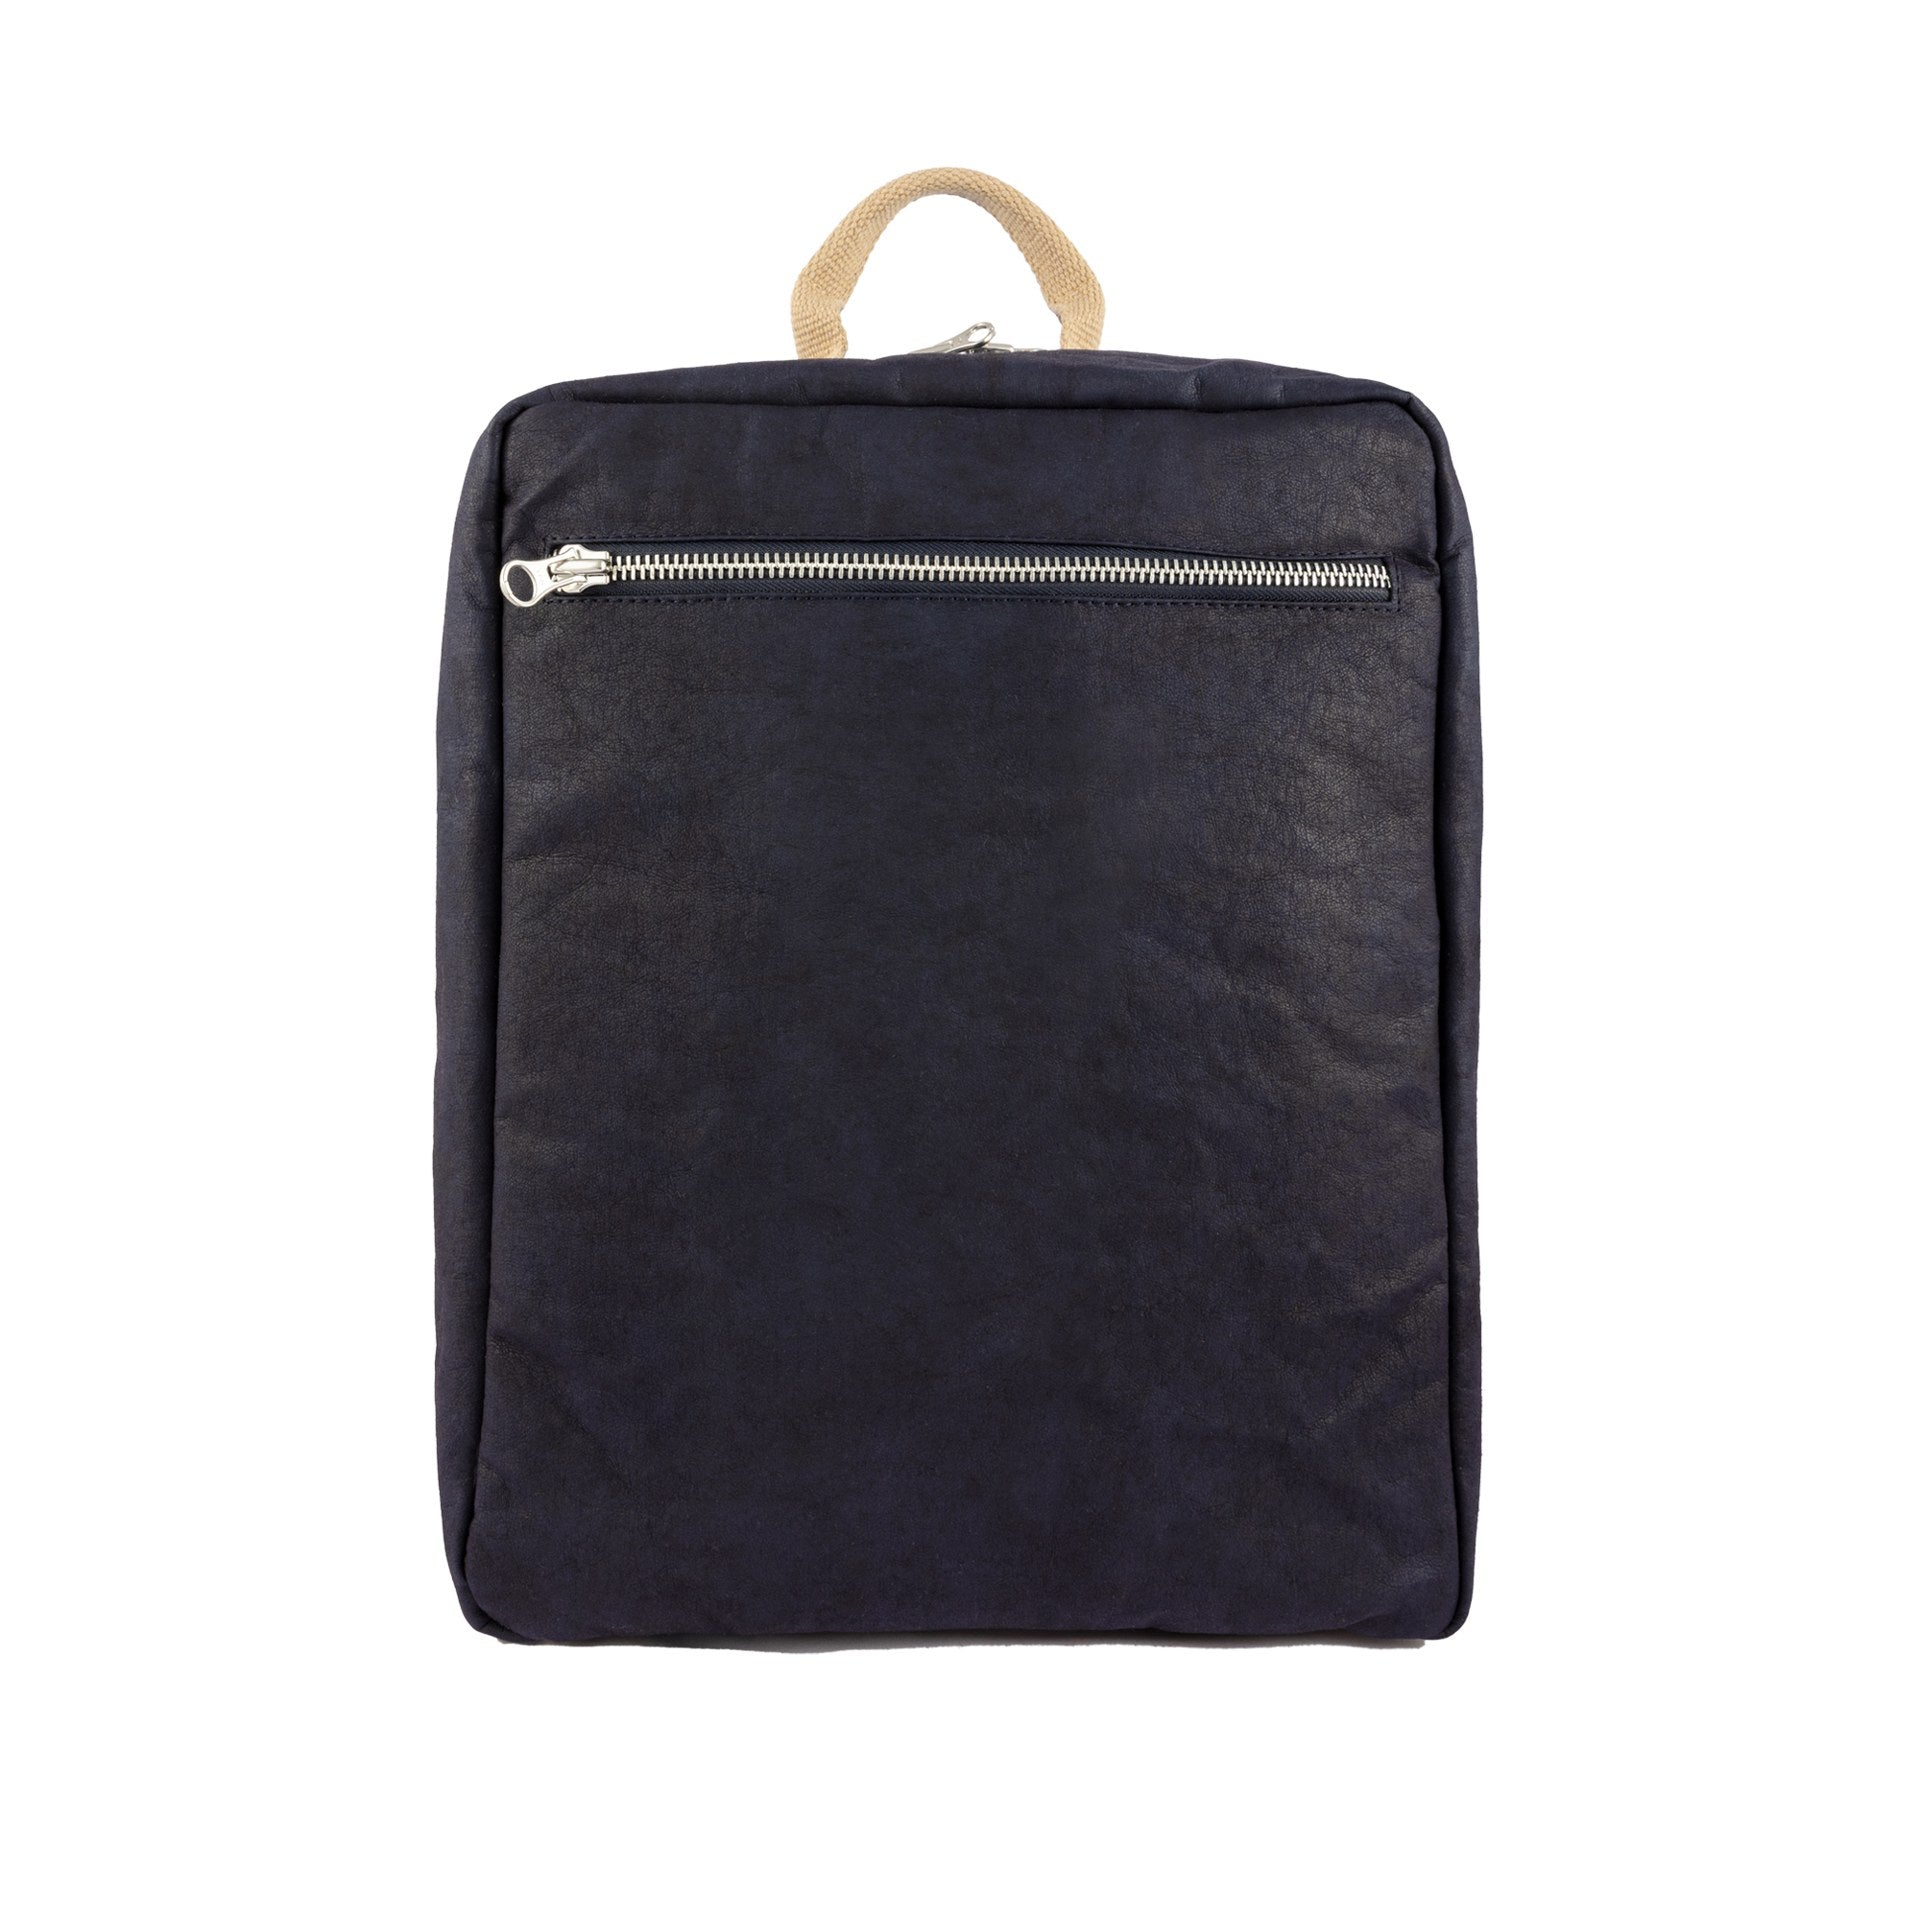 A square washable paper backpack is shown in a black colour. it has one external zip pocket and a top handle.